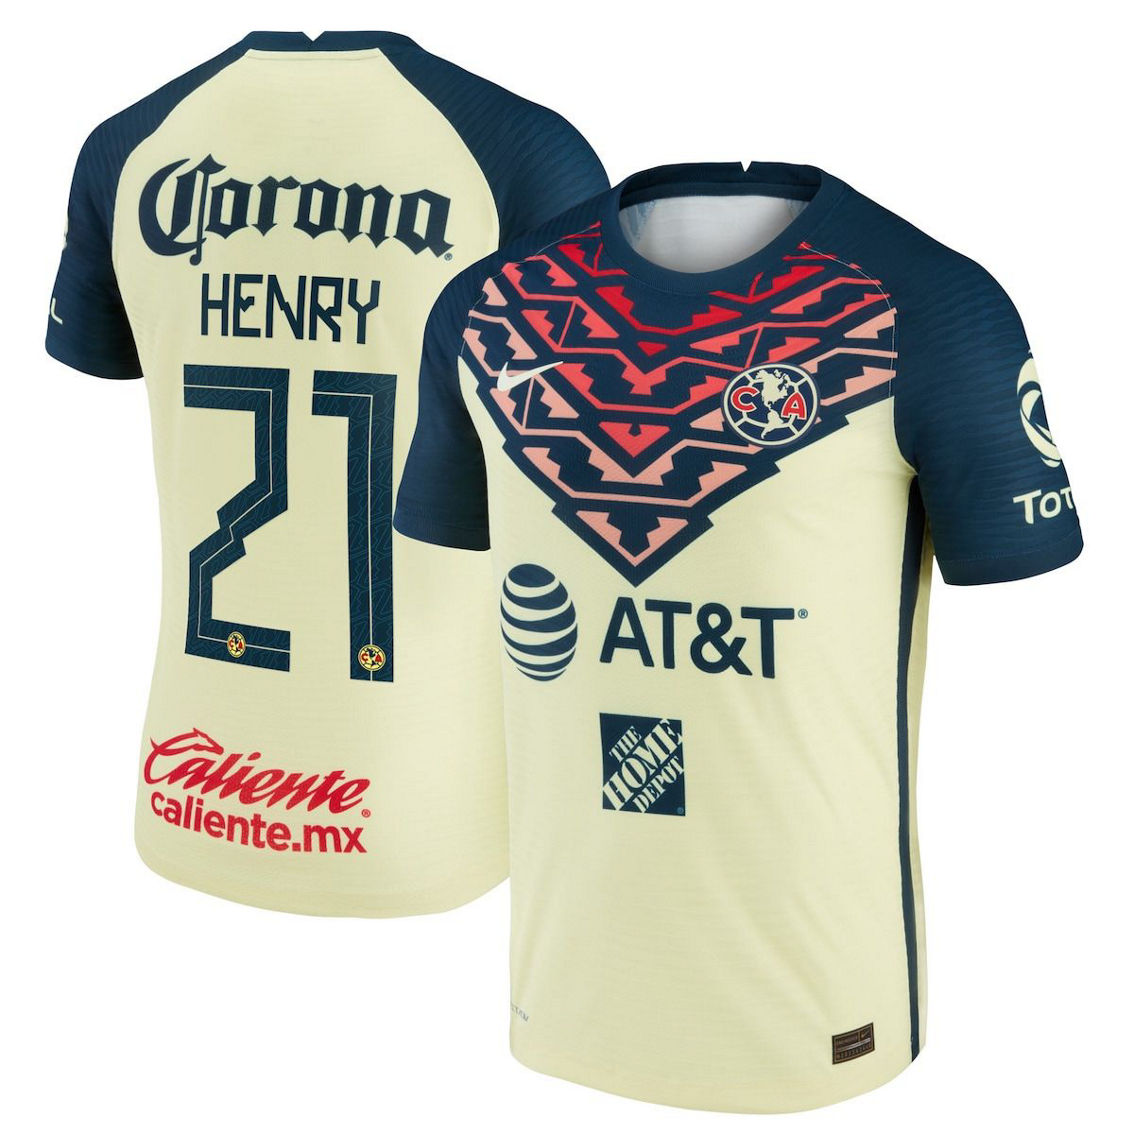 Nike Men's Henry Martín Yellow Club America 2021/22 Home Vapor Match Authentic Player Jersey - Image 2 of 4